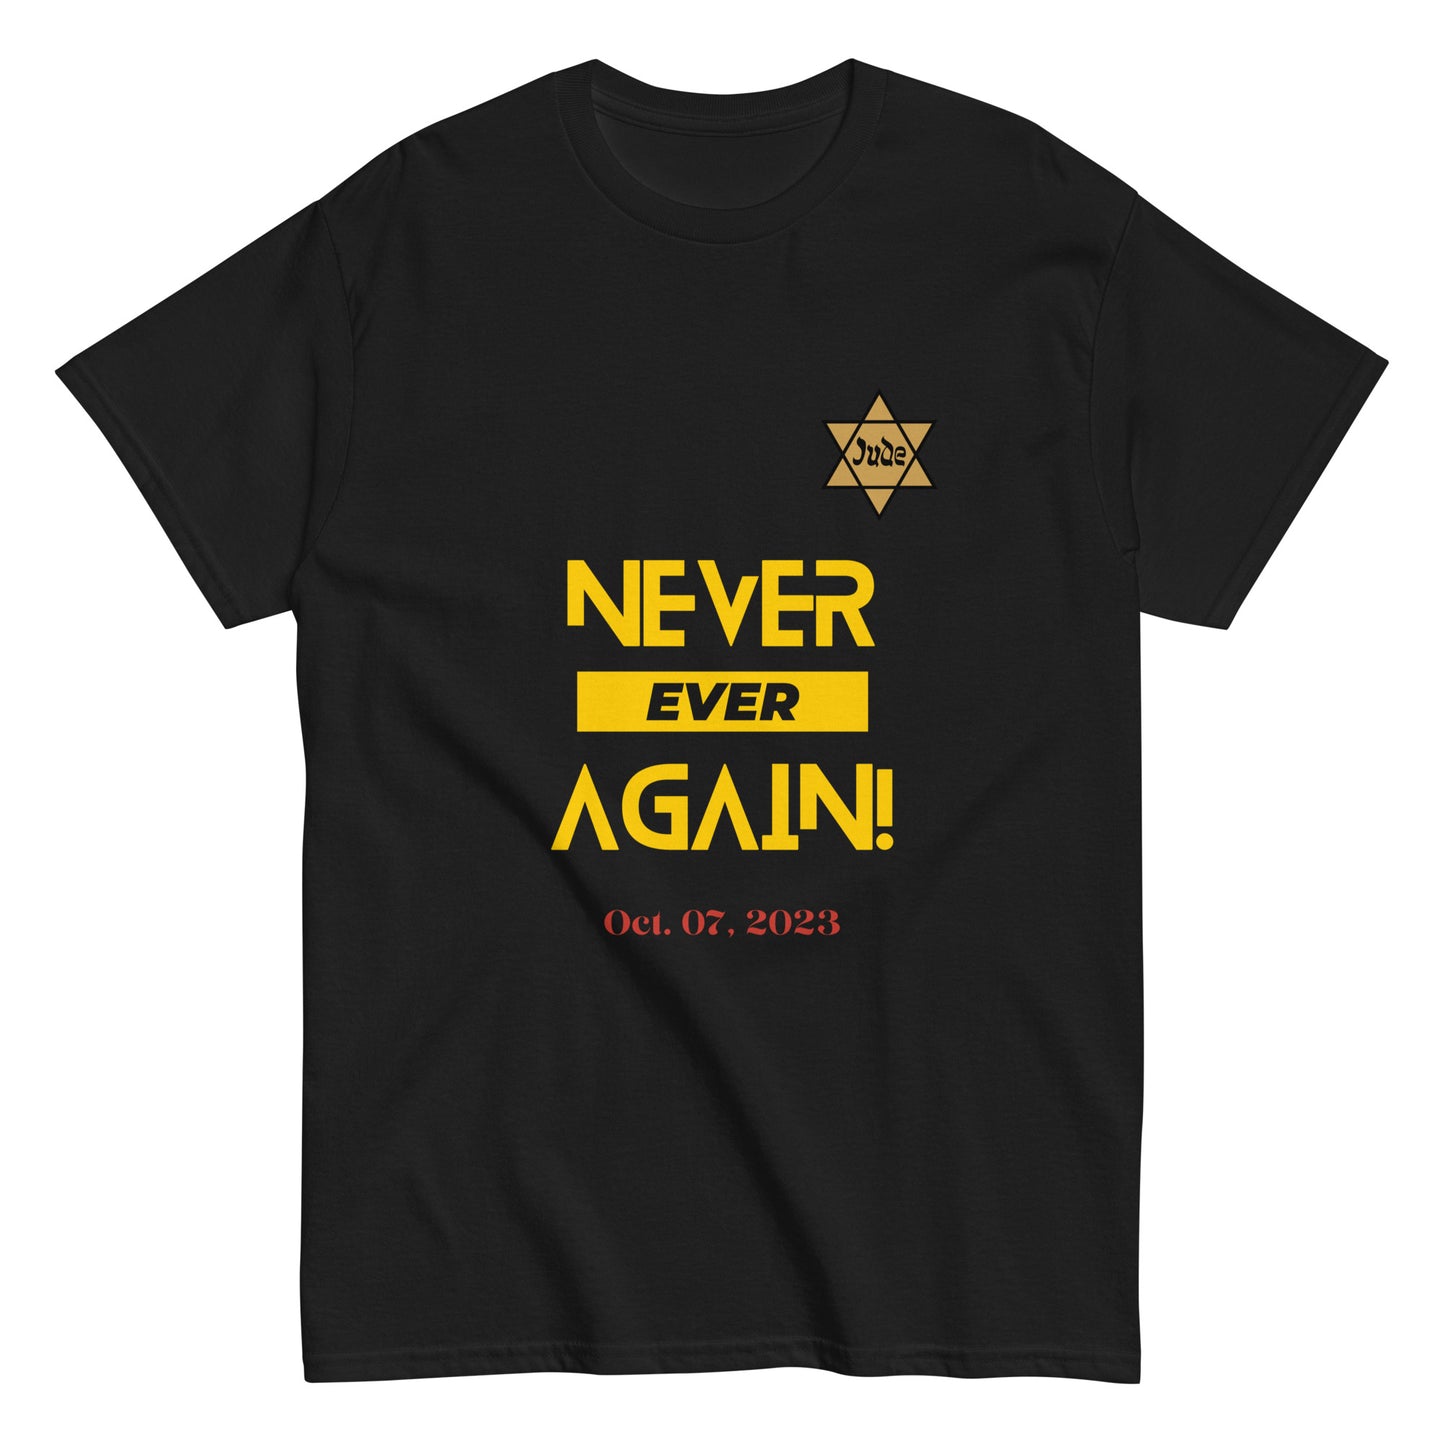 Never Ever Again - Jude - Men's classic tee (4 colors)